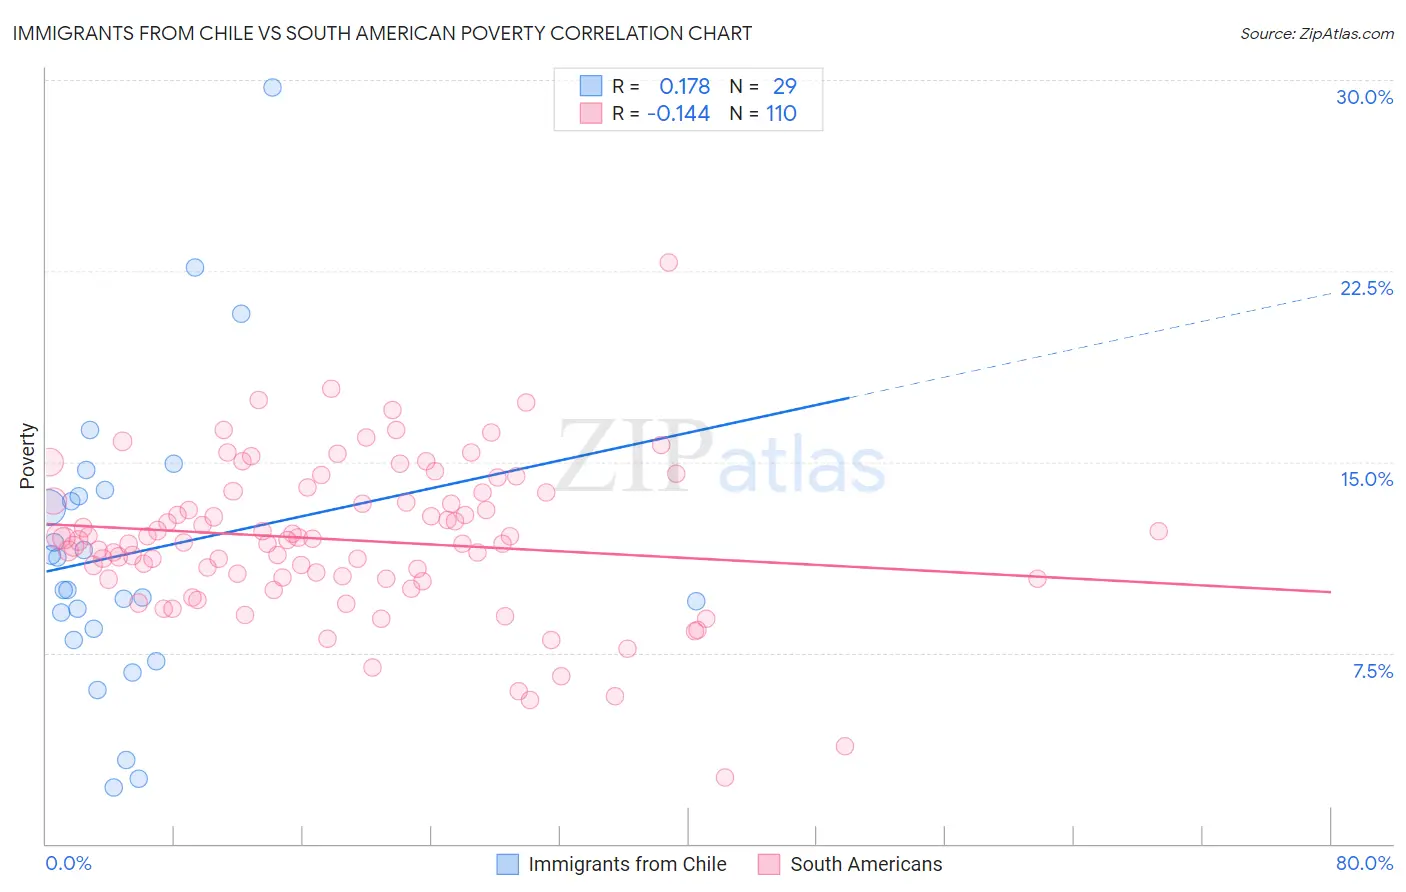 Immigrants from Chile vs South American Poverty